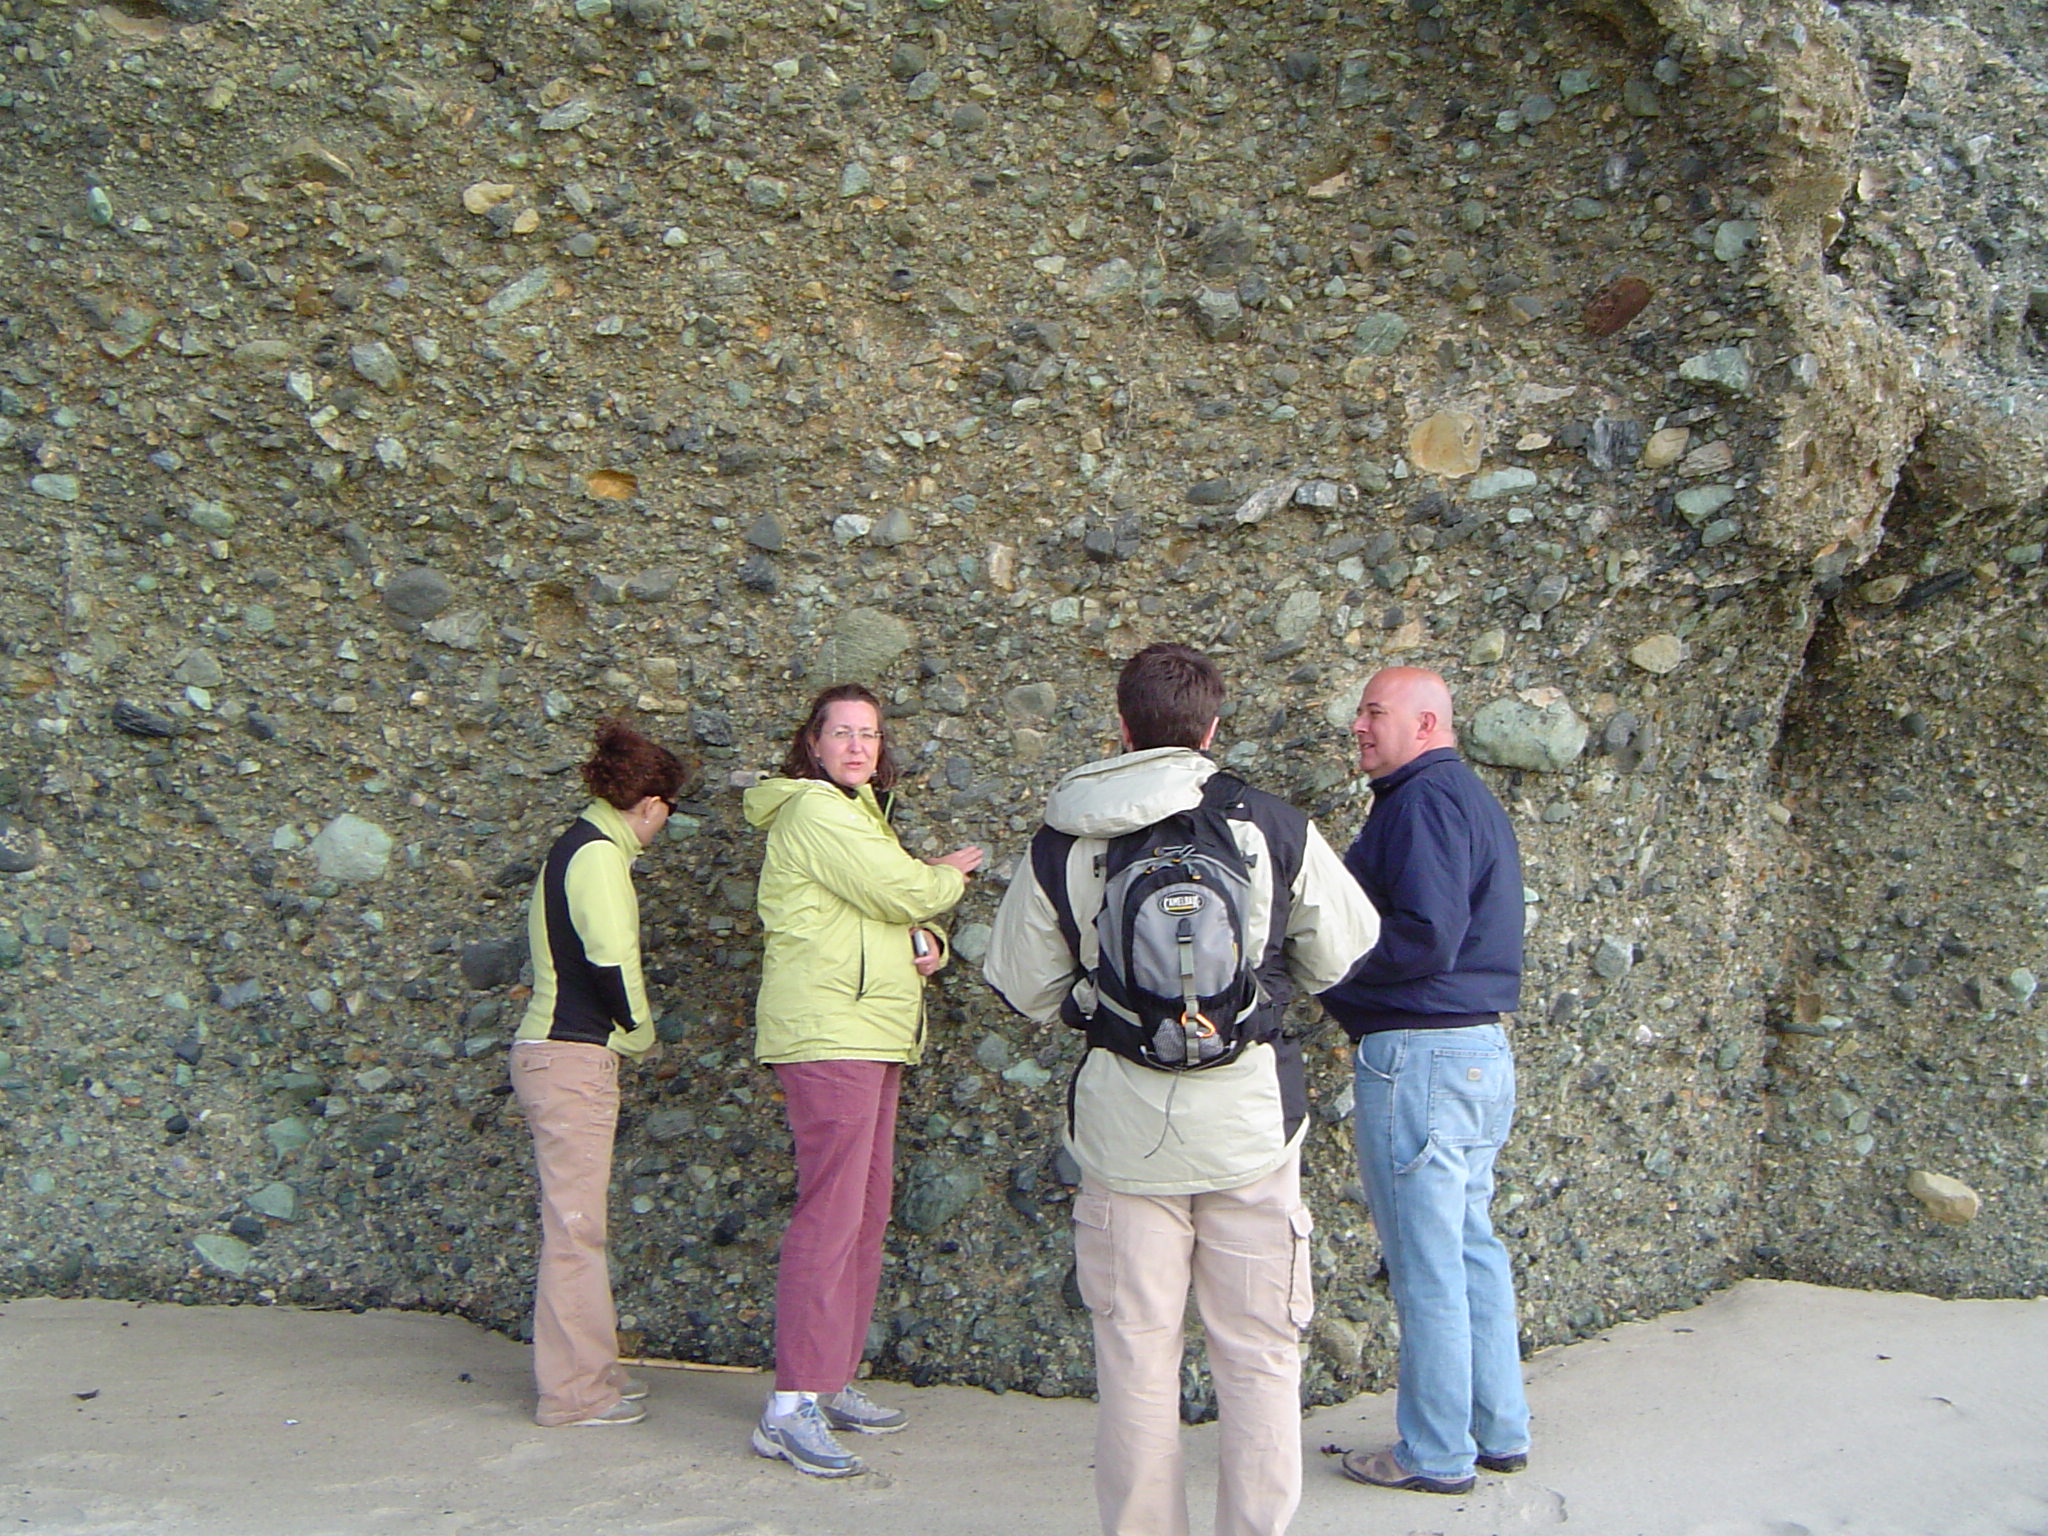 Laura, Michele, Scott and Chris discussing the outcrop